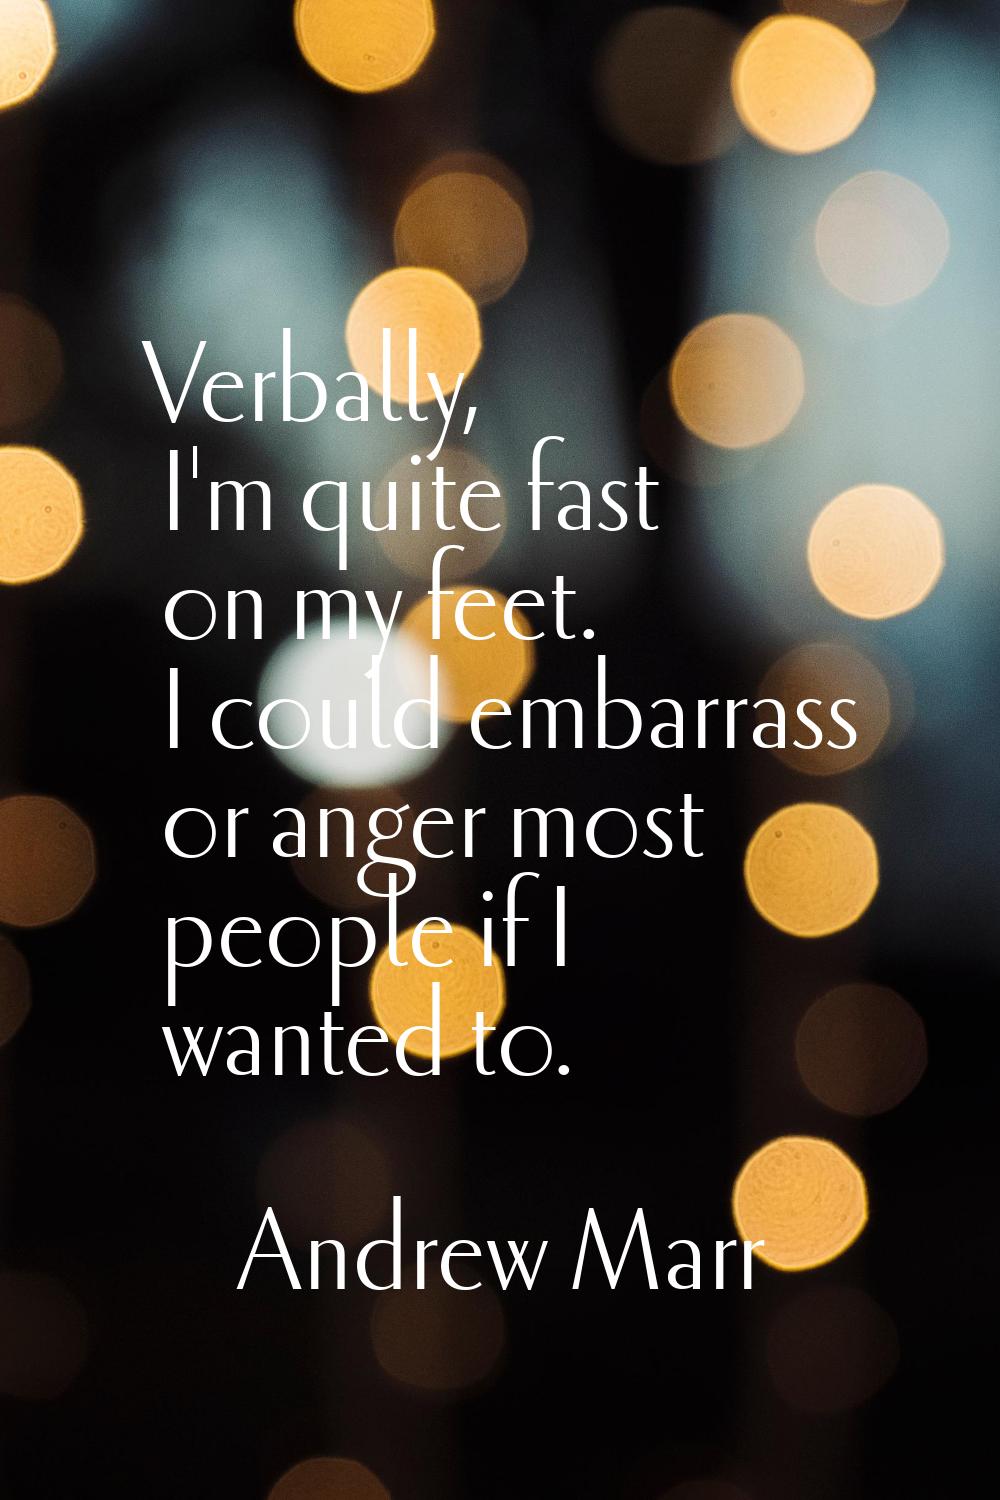 Verbally, I'm quite fast on my feet. I could embarrass or anger most people if I wanted to.